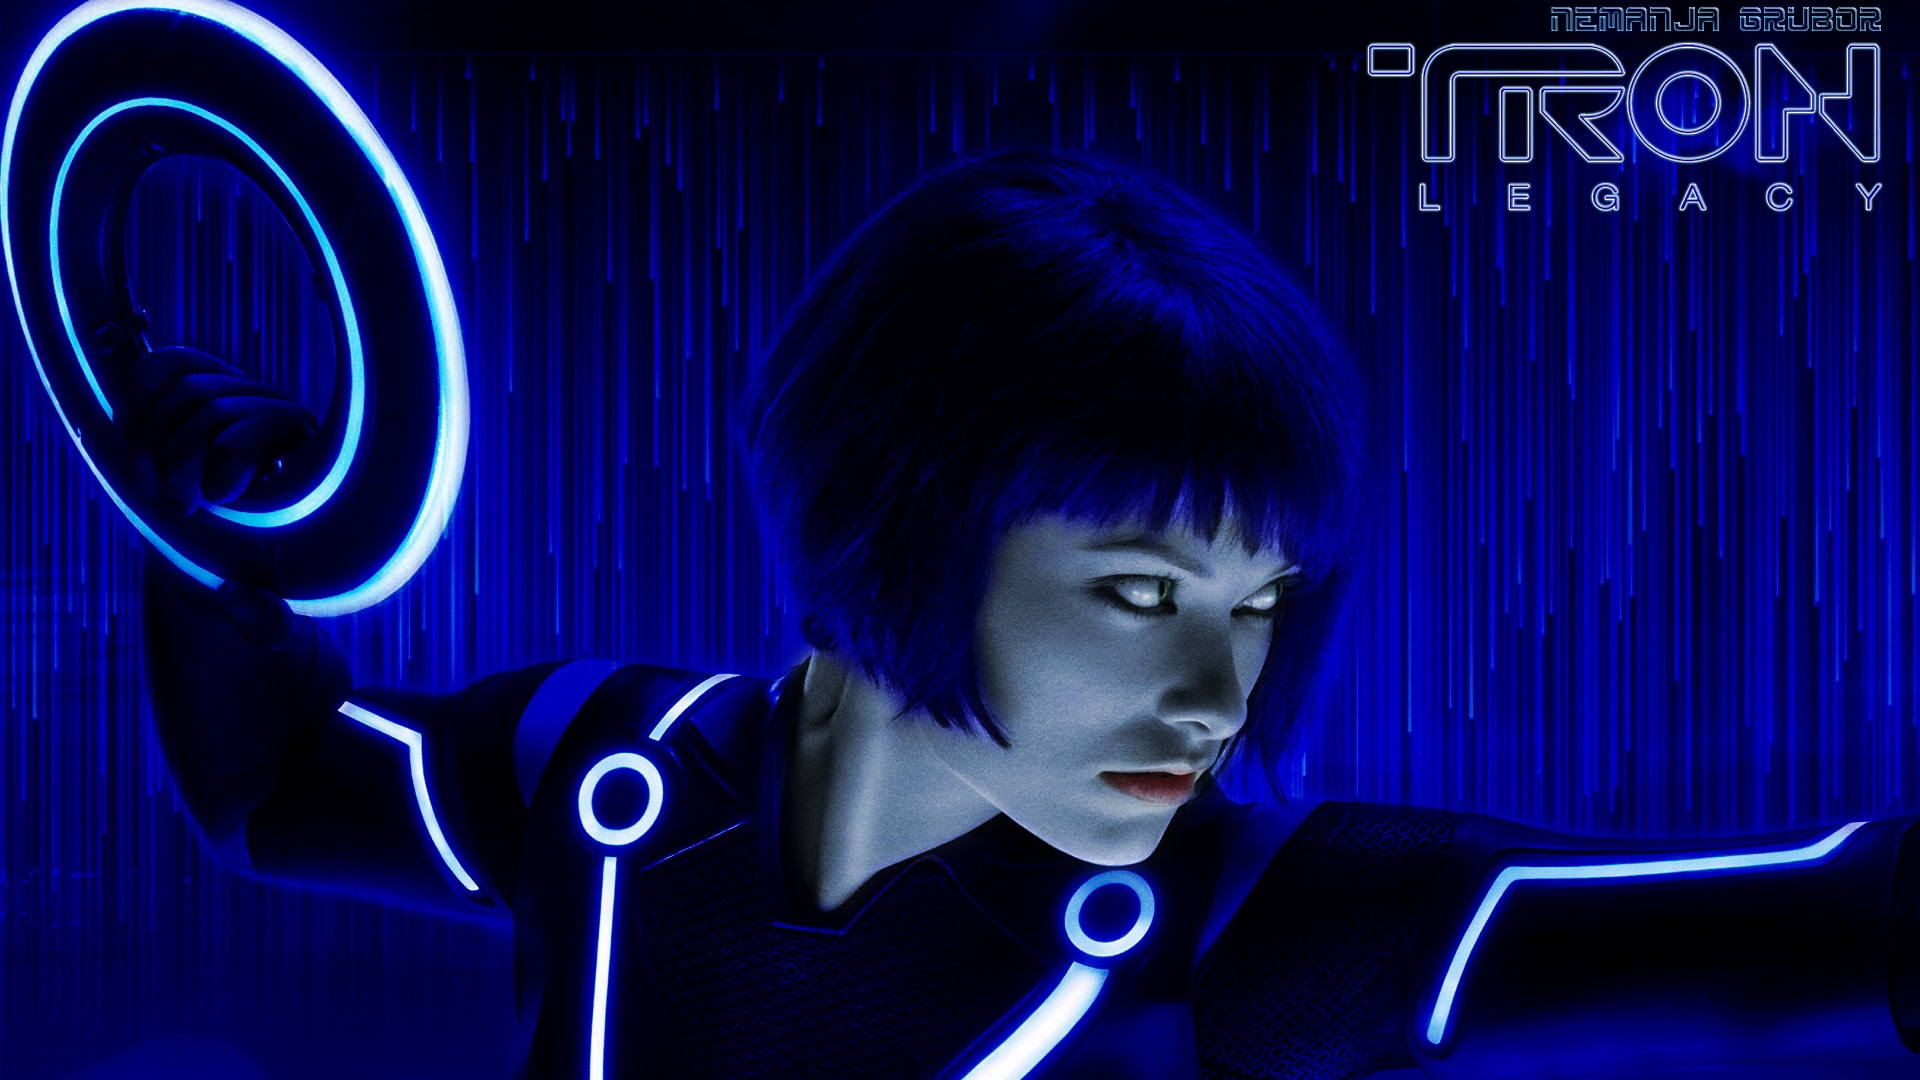 Olivia Wilde Tron Legacy HD Wallpaper By Ngrubor On